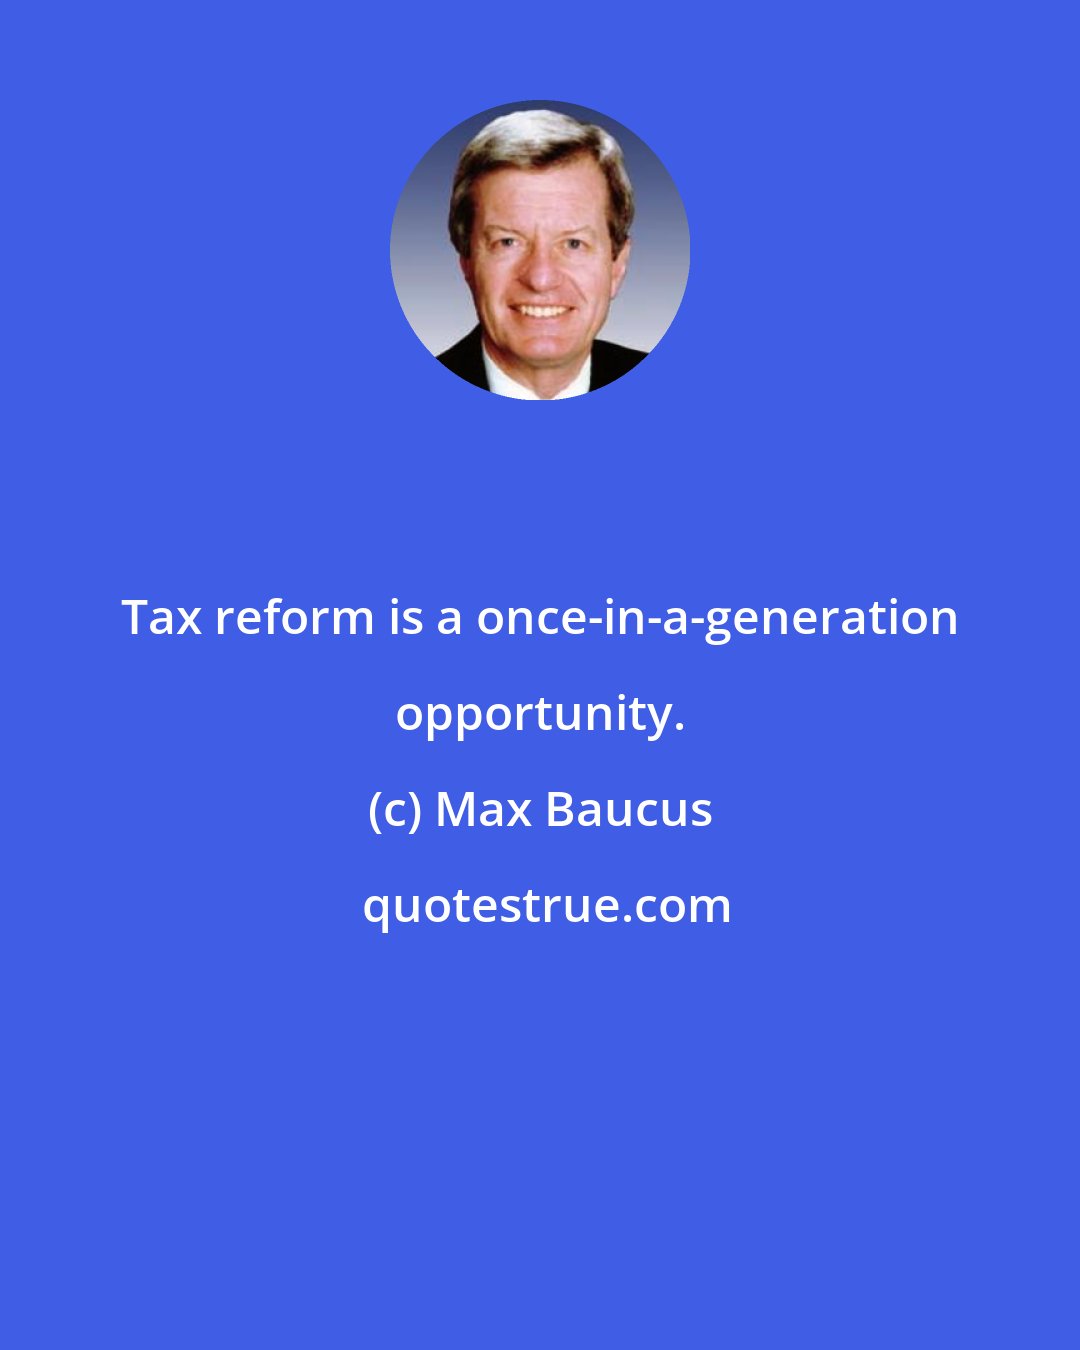 Max Baucus: Tax reform is a once-in-a-generation opportunity.